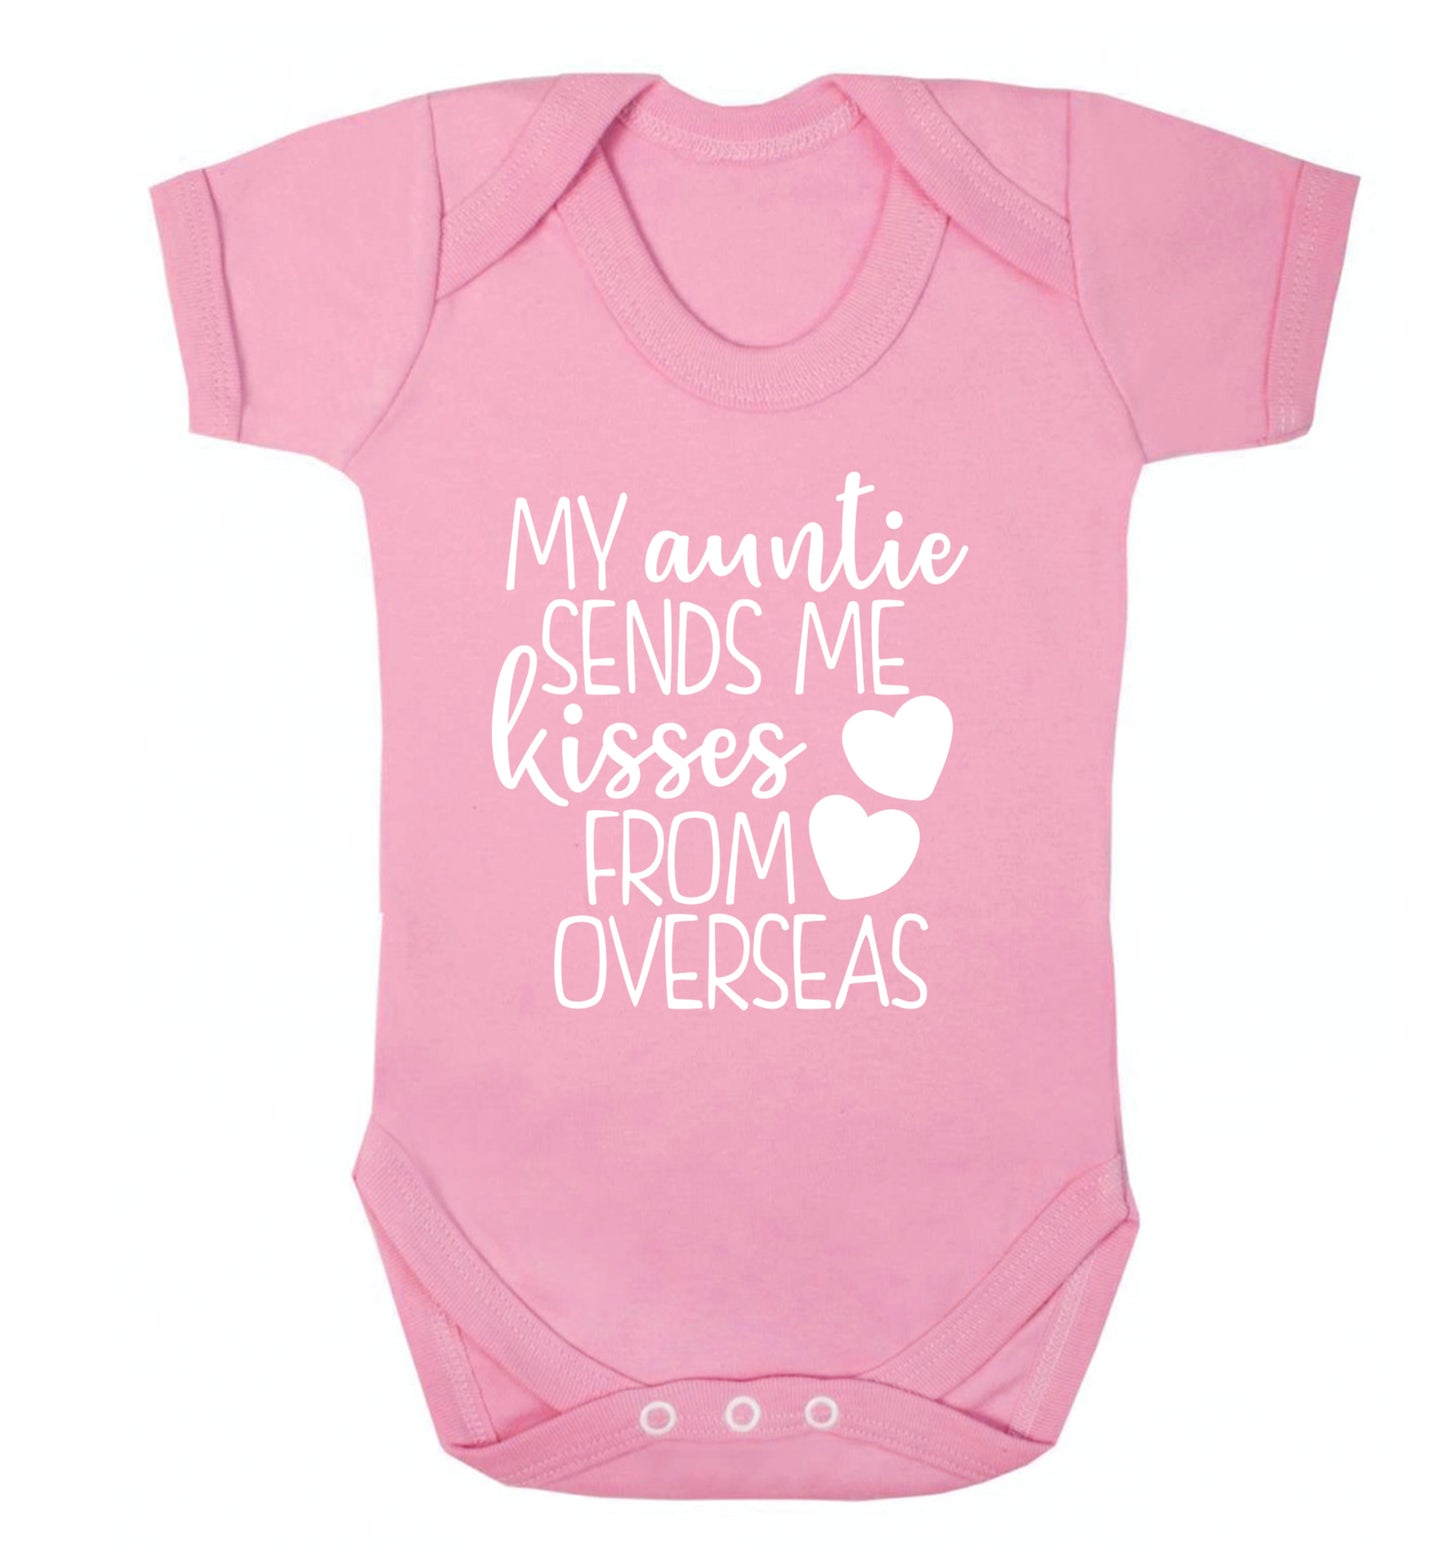 My auntie sends me kisses from overseas Baby Vest pale pink 18-24 months